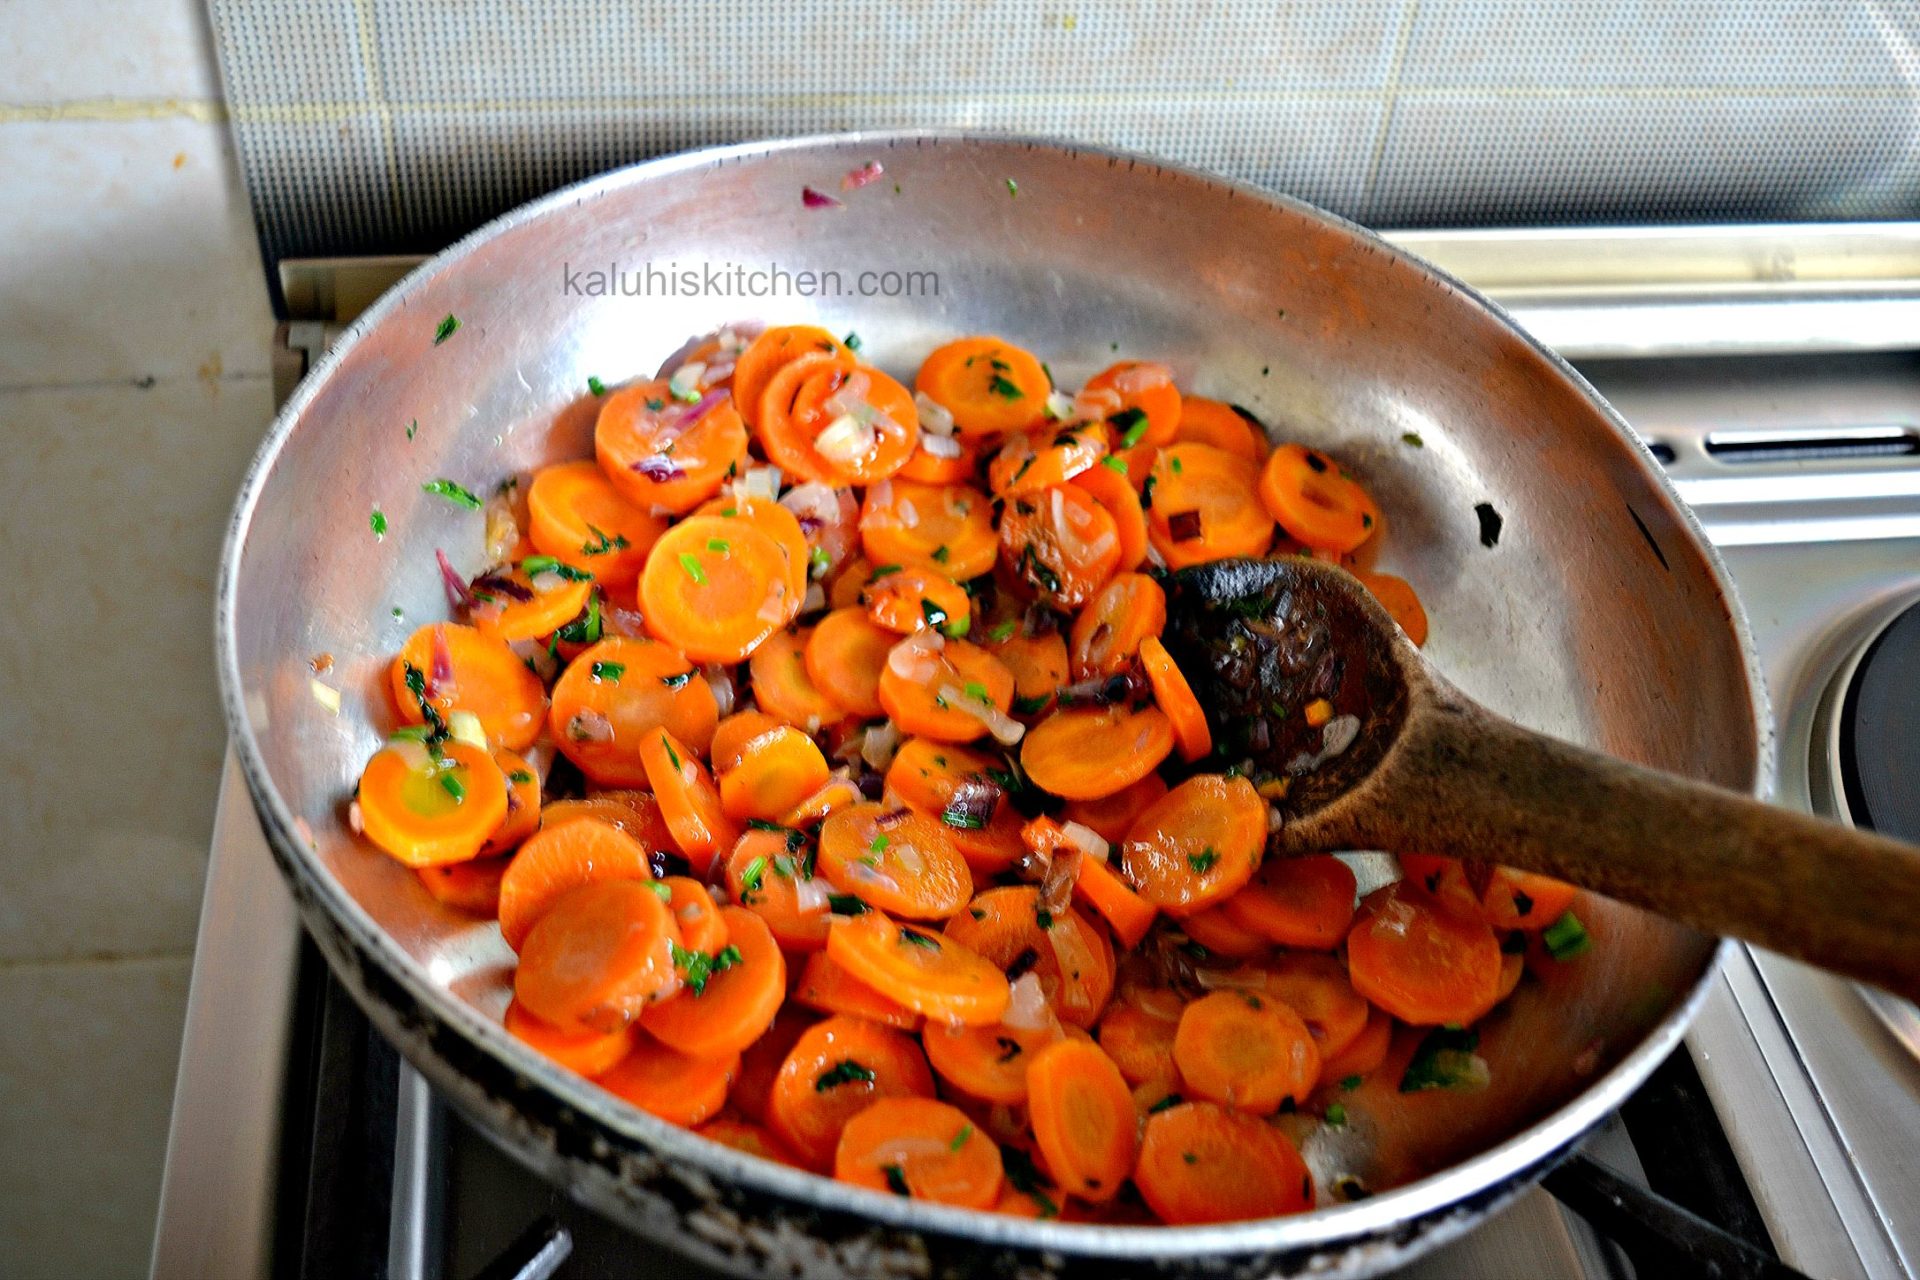 steamed carrots will require just a light sautee since they are already cooked. buttered carrots_carrot recipes_kaluhiskitchen.com